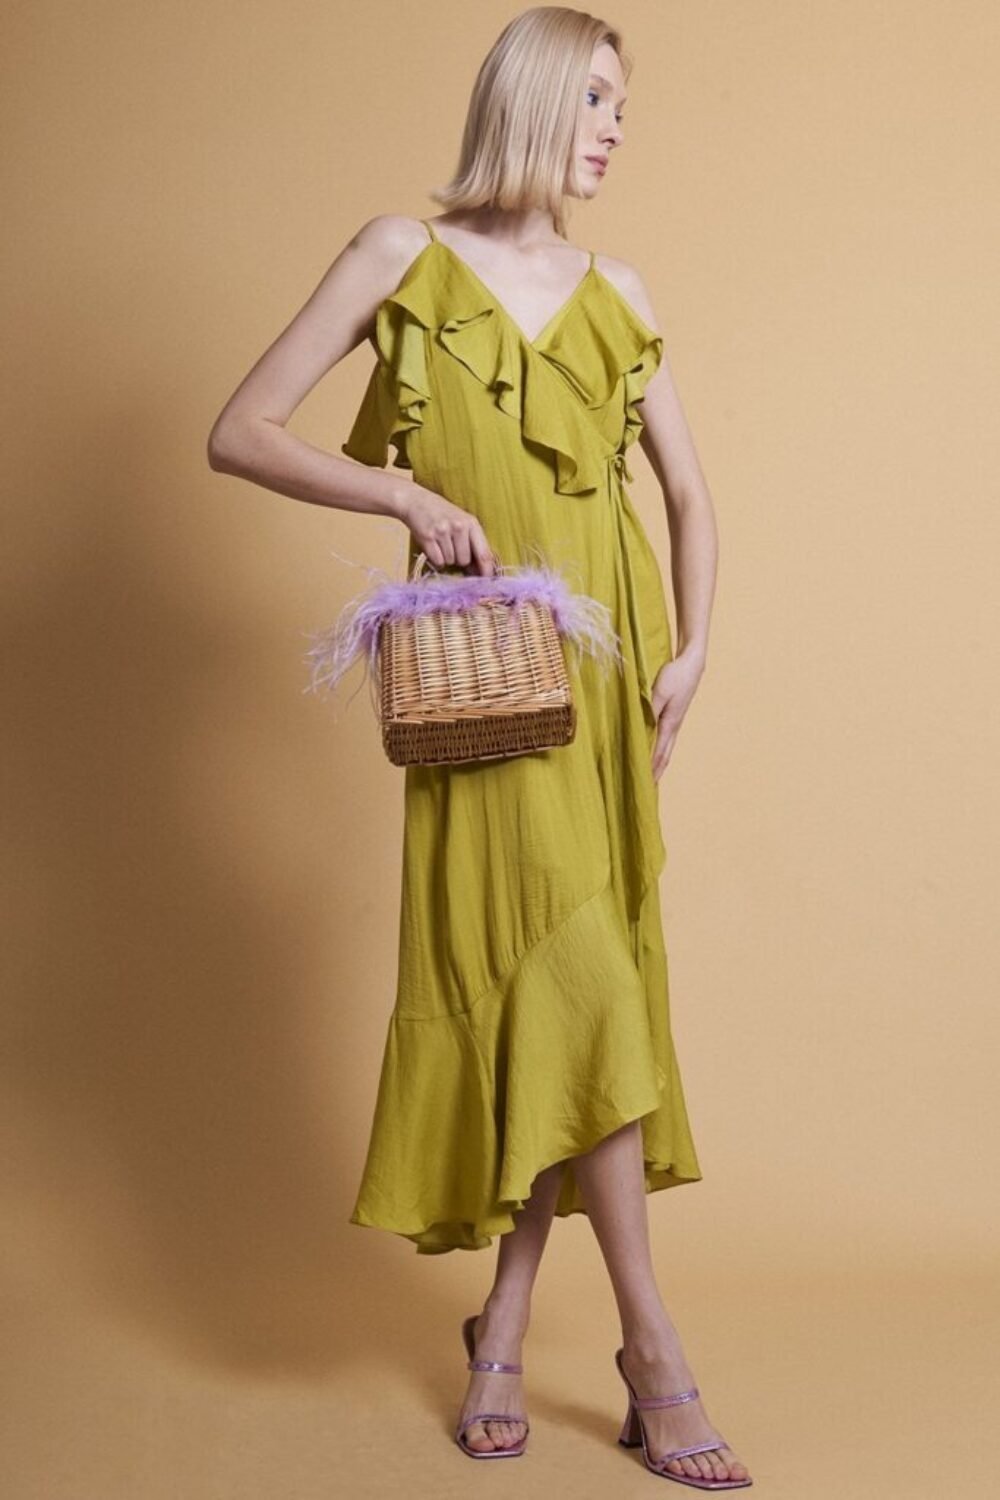 Shop Lux Chartreuse Silk Blend Maxi Ruffle Dress and women's luxury and designer clothes at www.lux-apparel.co.uk